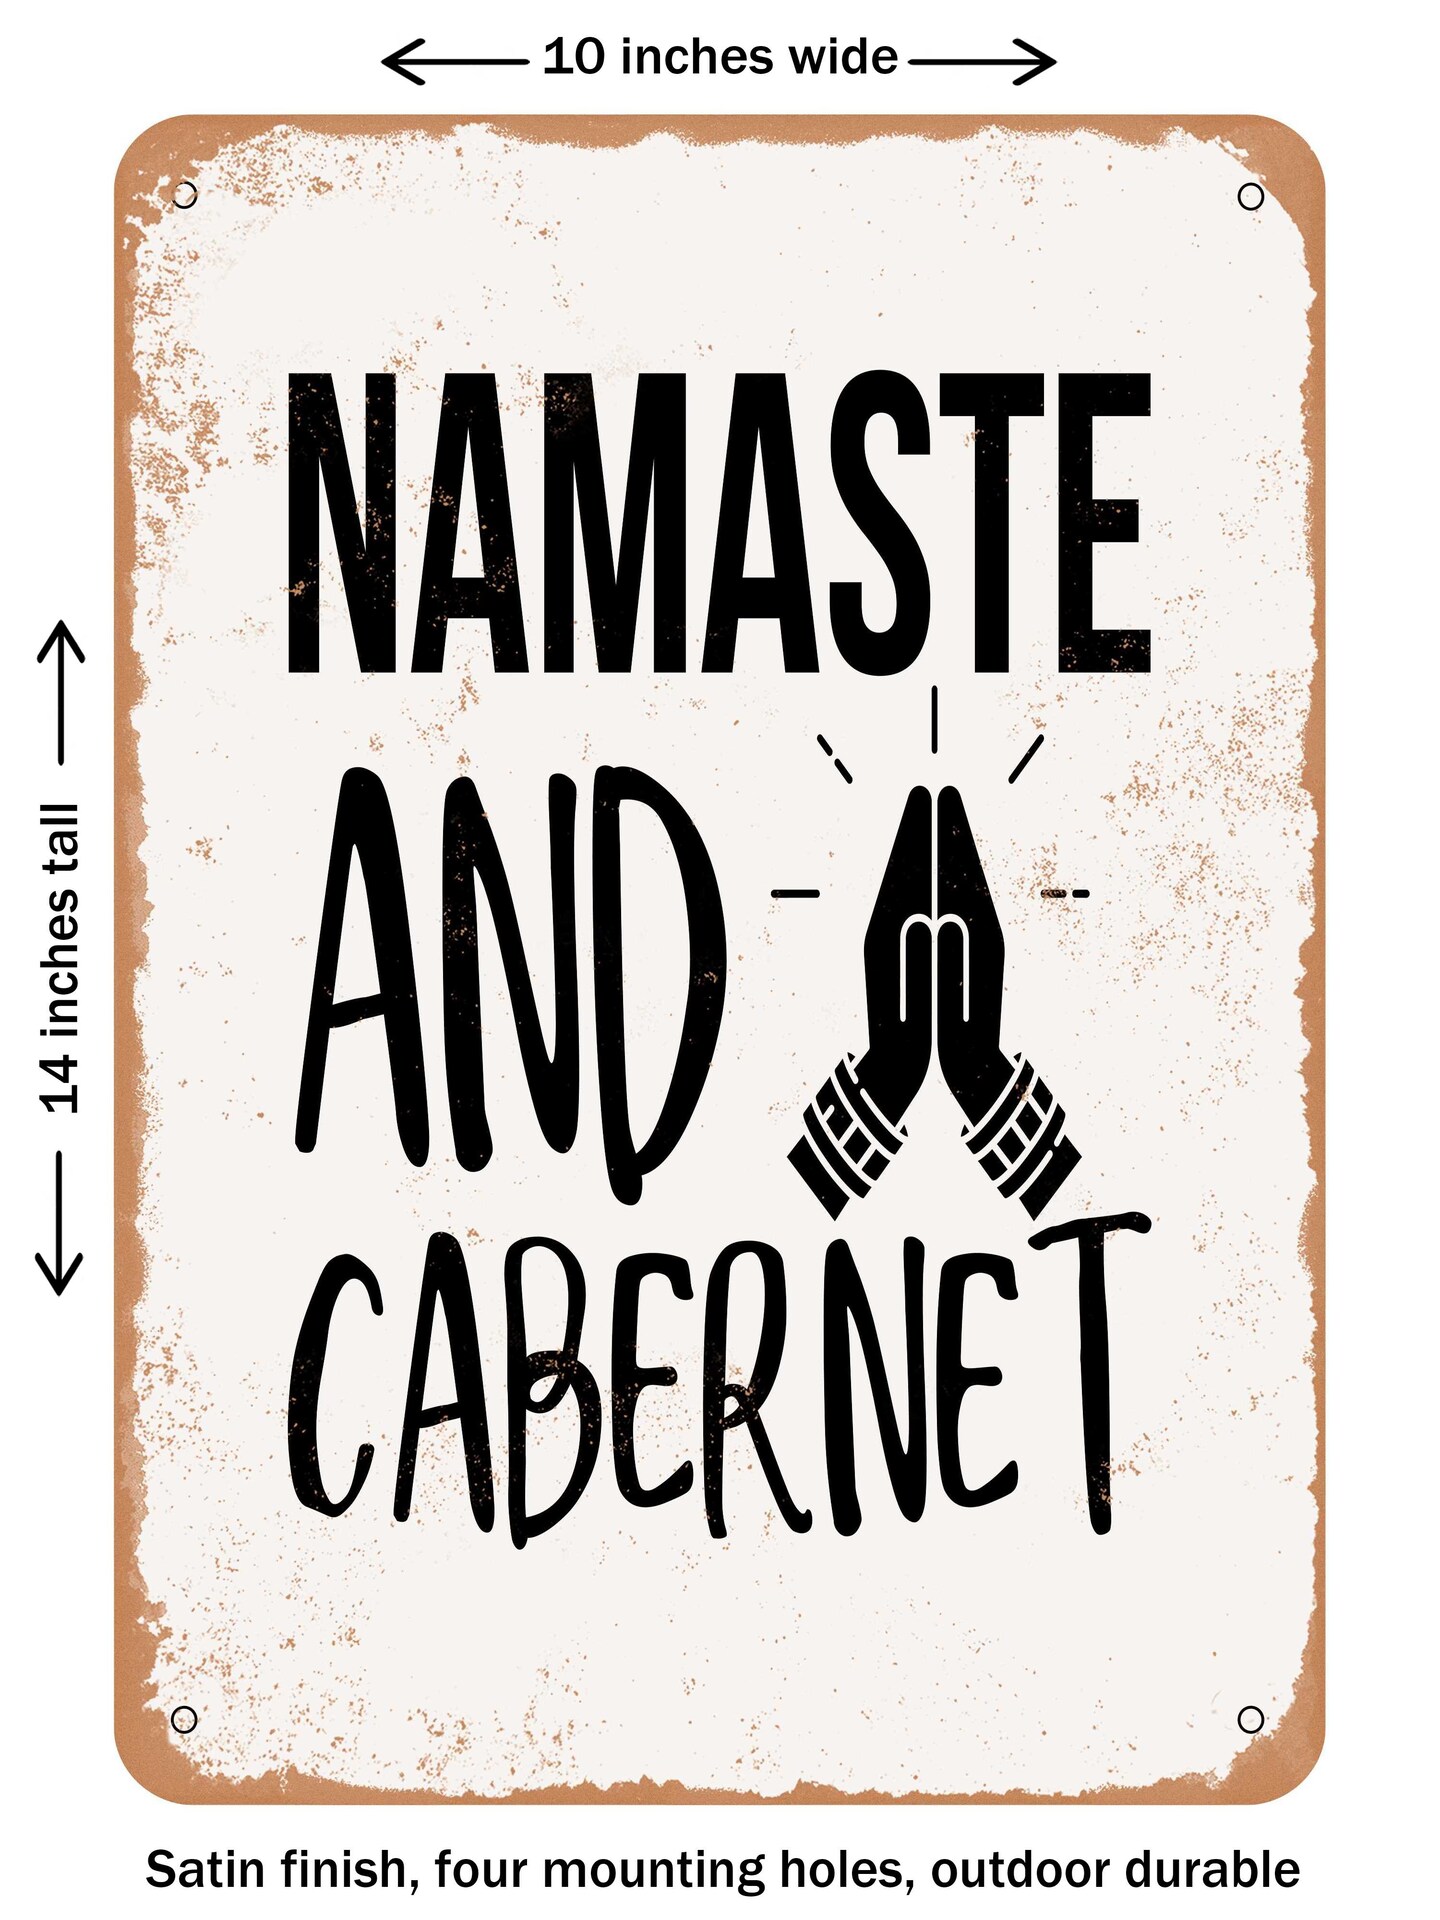 DECORATIVE METAL SIGN - Namaste and Cabernet  - Vintage Rusty Look